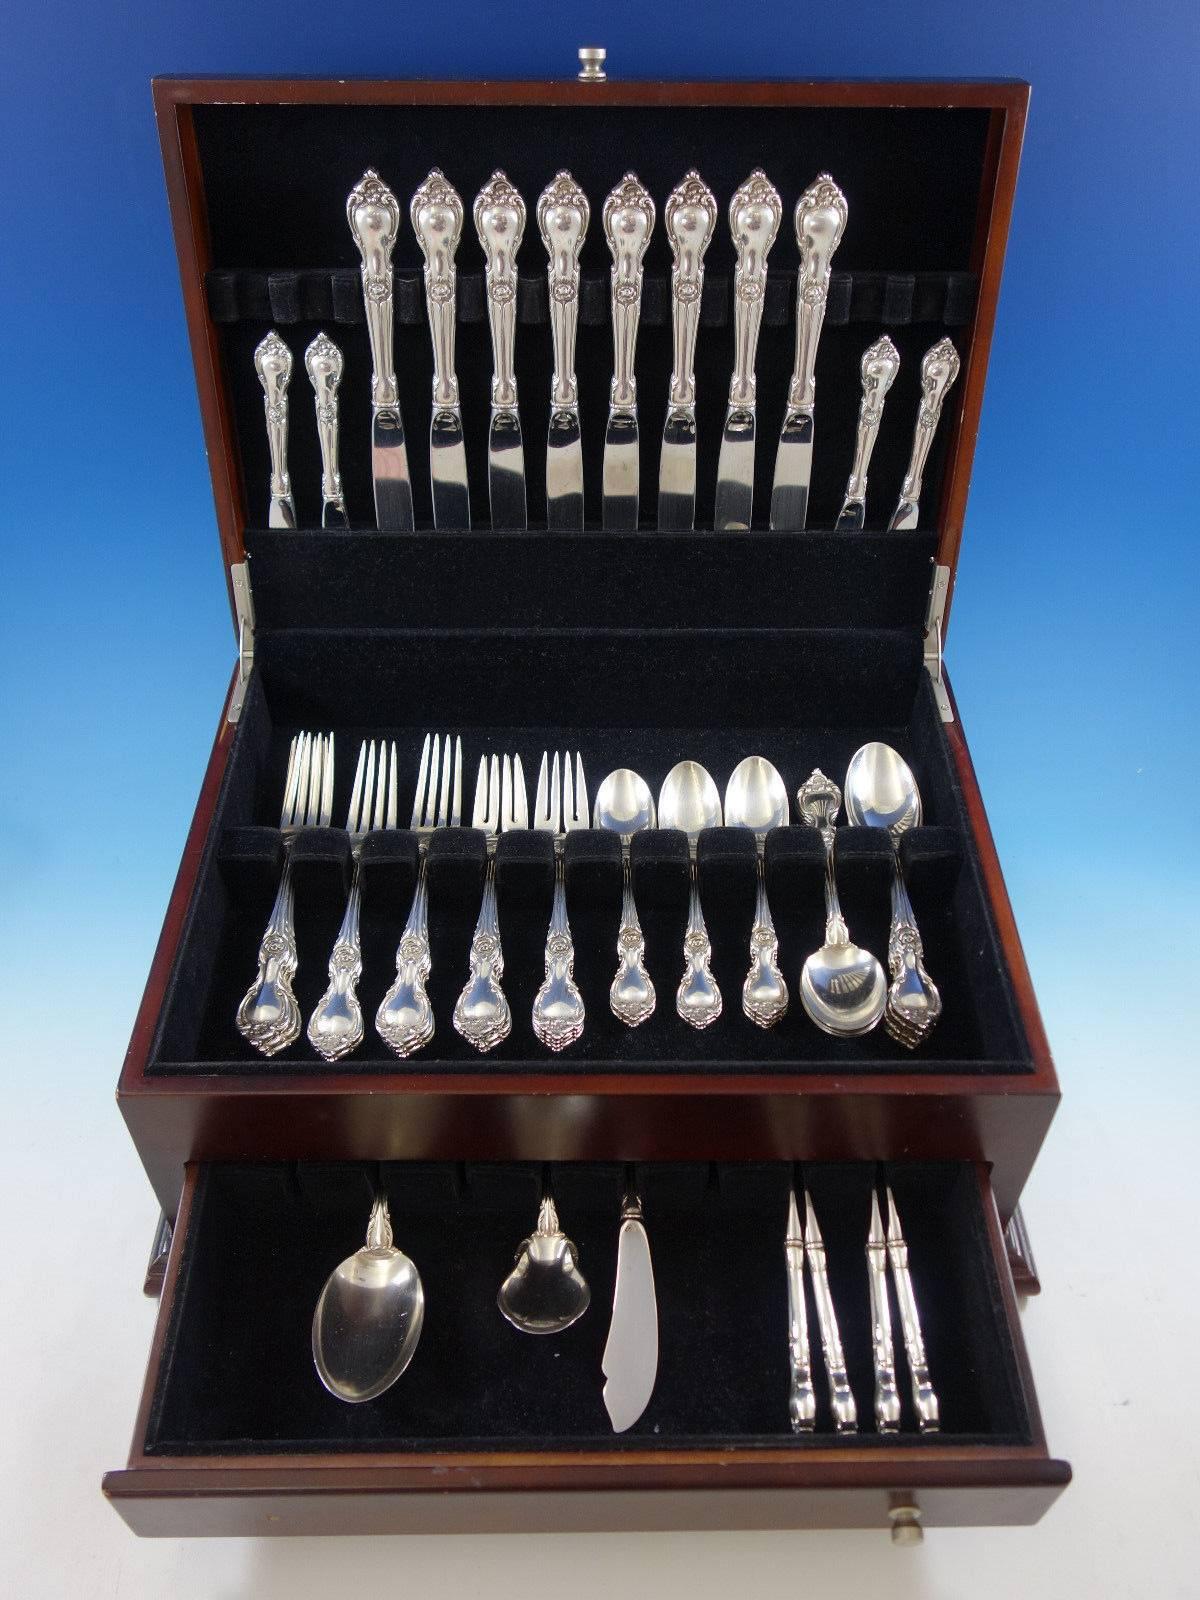 Alexandra by Lunt sterling silver flatware set, 51 pieces. This set includes: 

Eight knives, 9